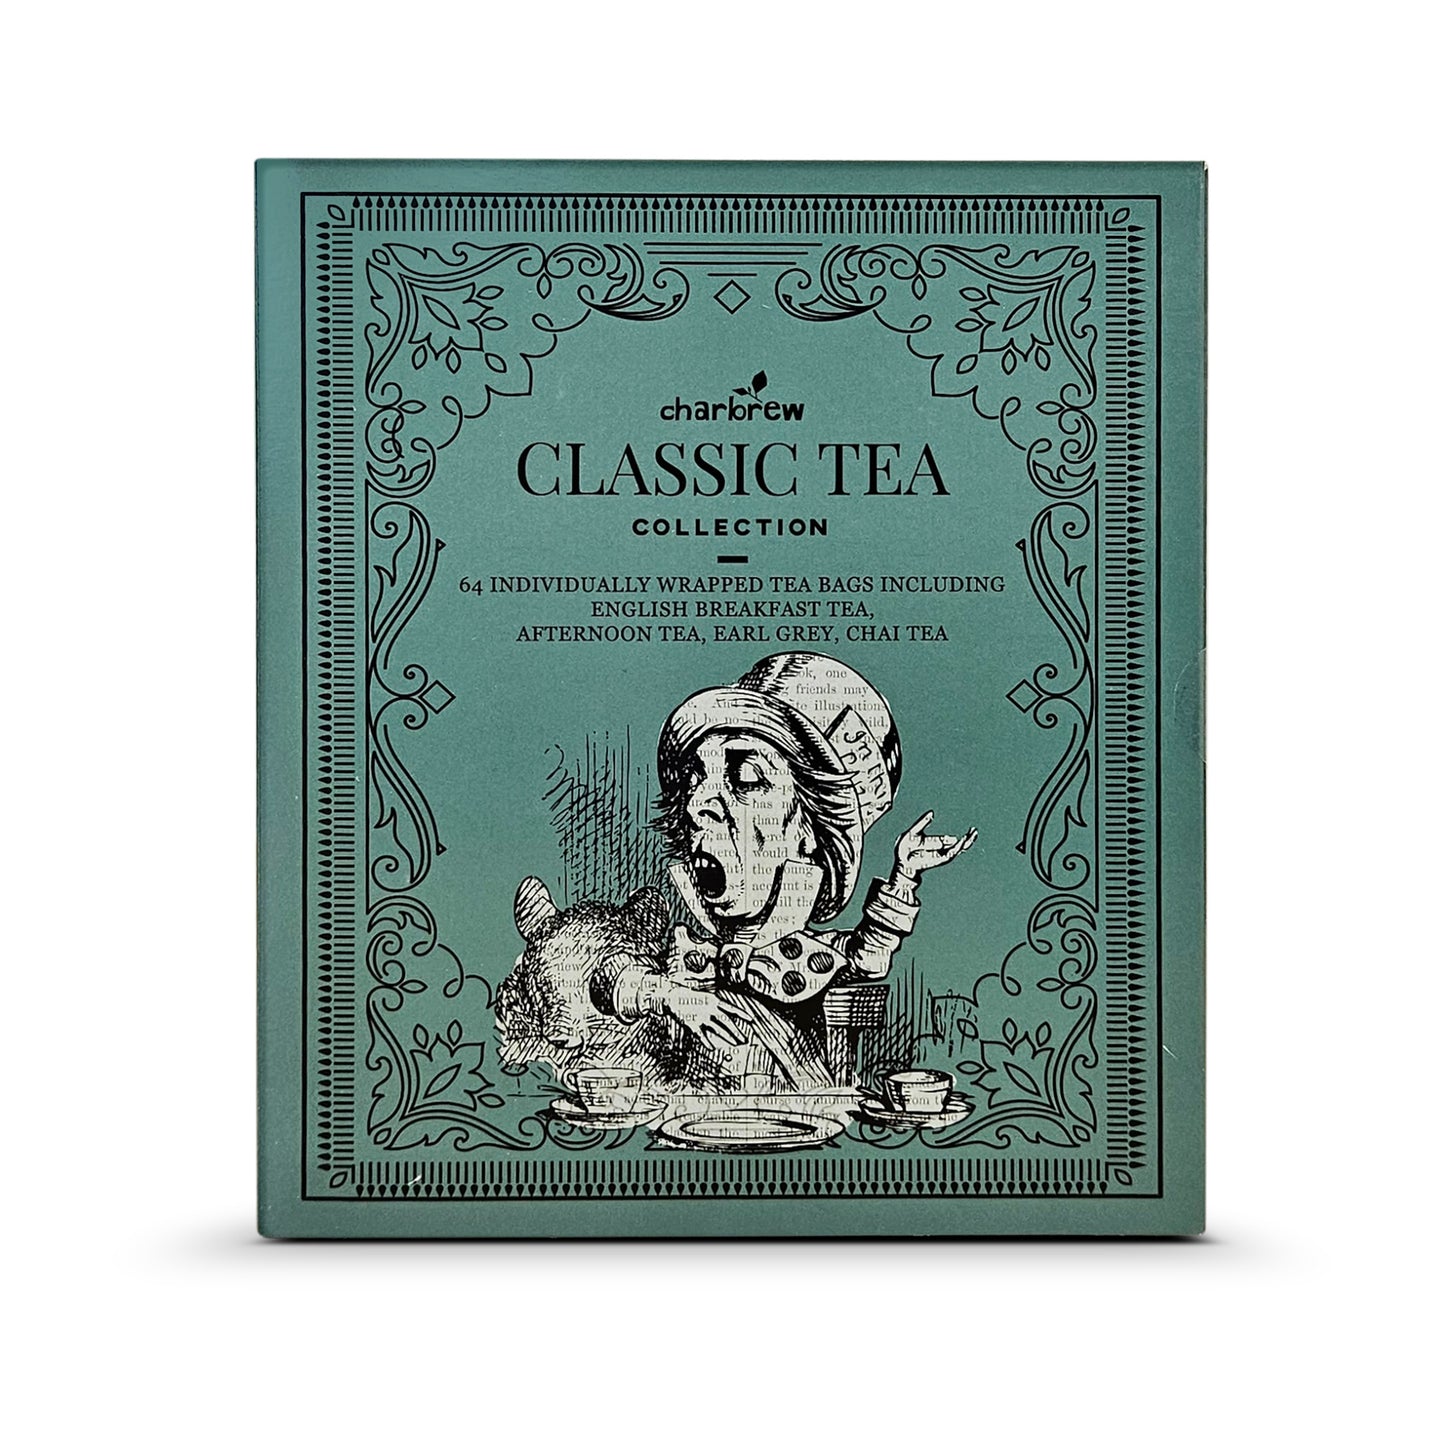 Mad Hatter Tea Book Gift - 64 Individually Wrapped Teabags